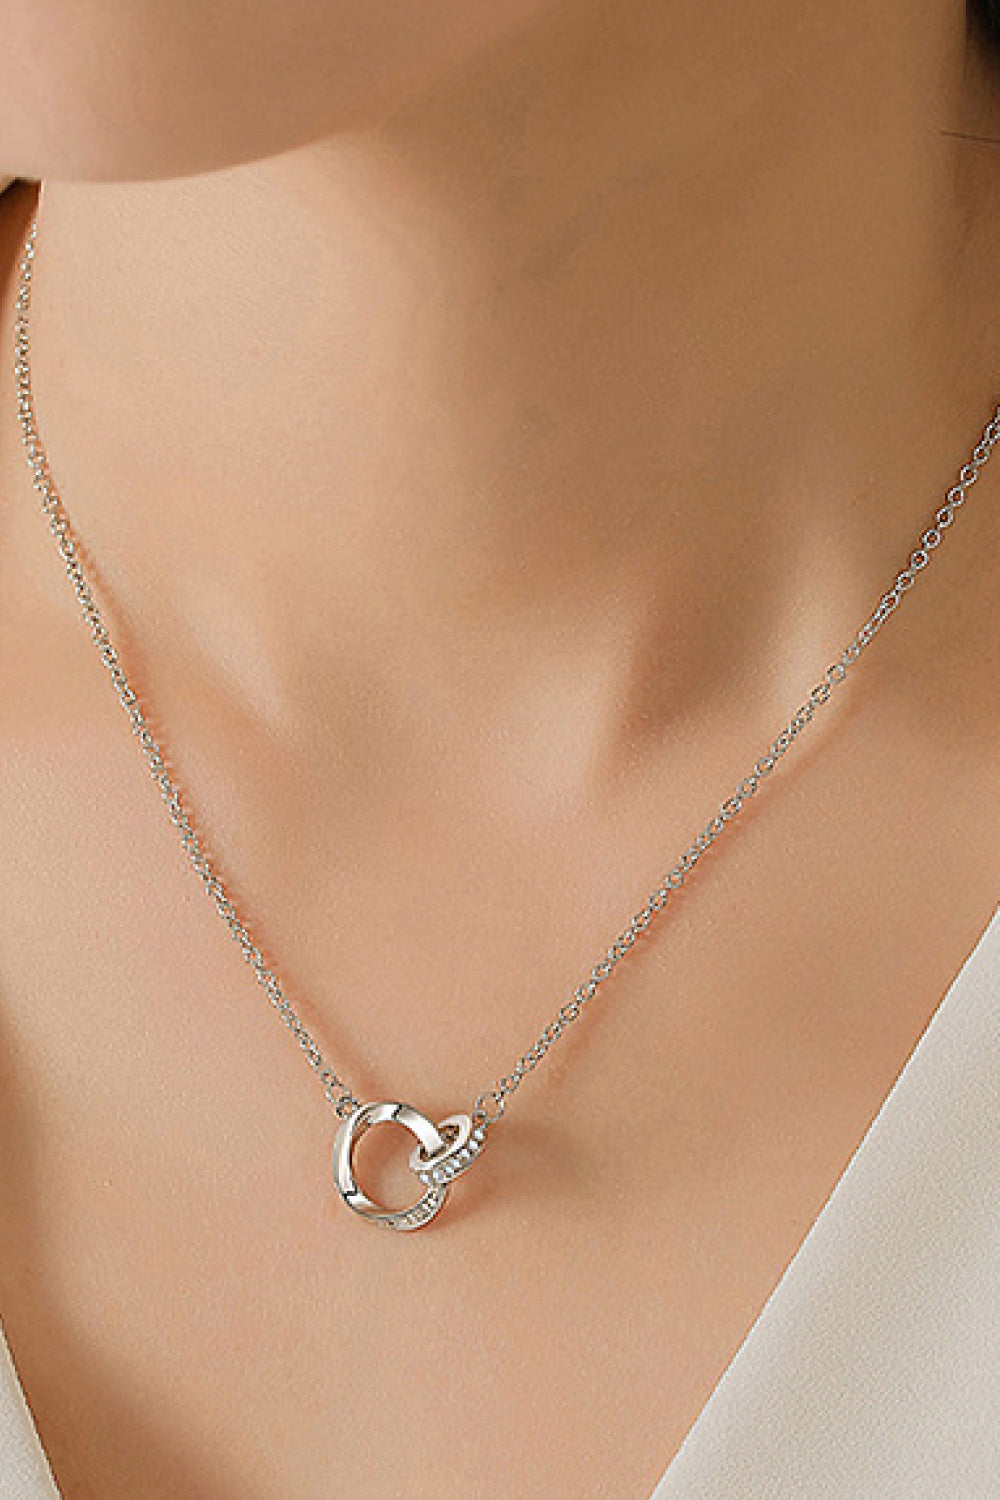 Shop Louis Vuitton Fall In Love Necklace (M00465) by lifeisfun